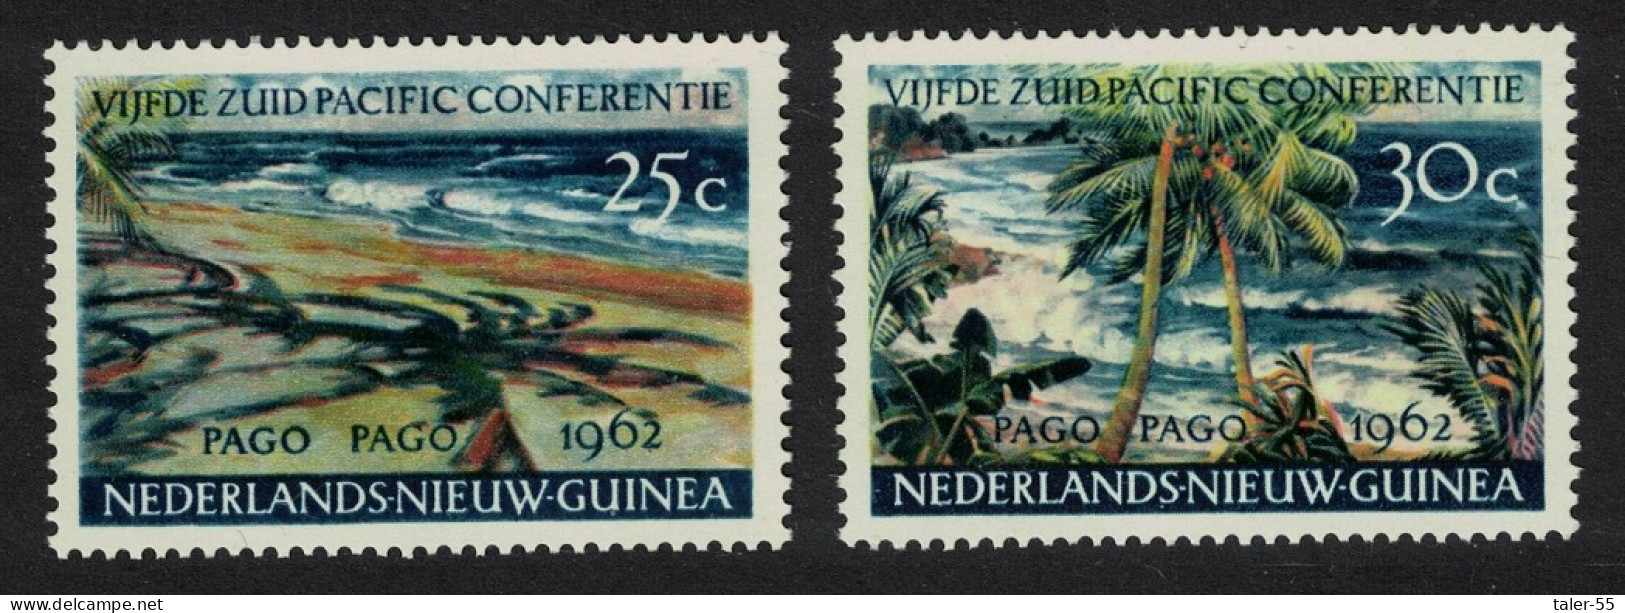 Neth. New Guinea Fifth South Pacific Conference Pago Pago 2v 1962 MNH SG#82-83 - Nuova Guinea Olandese